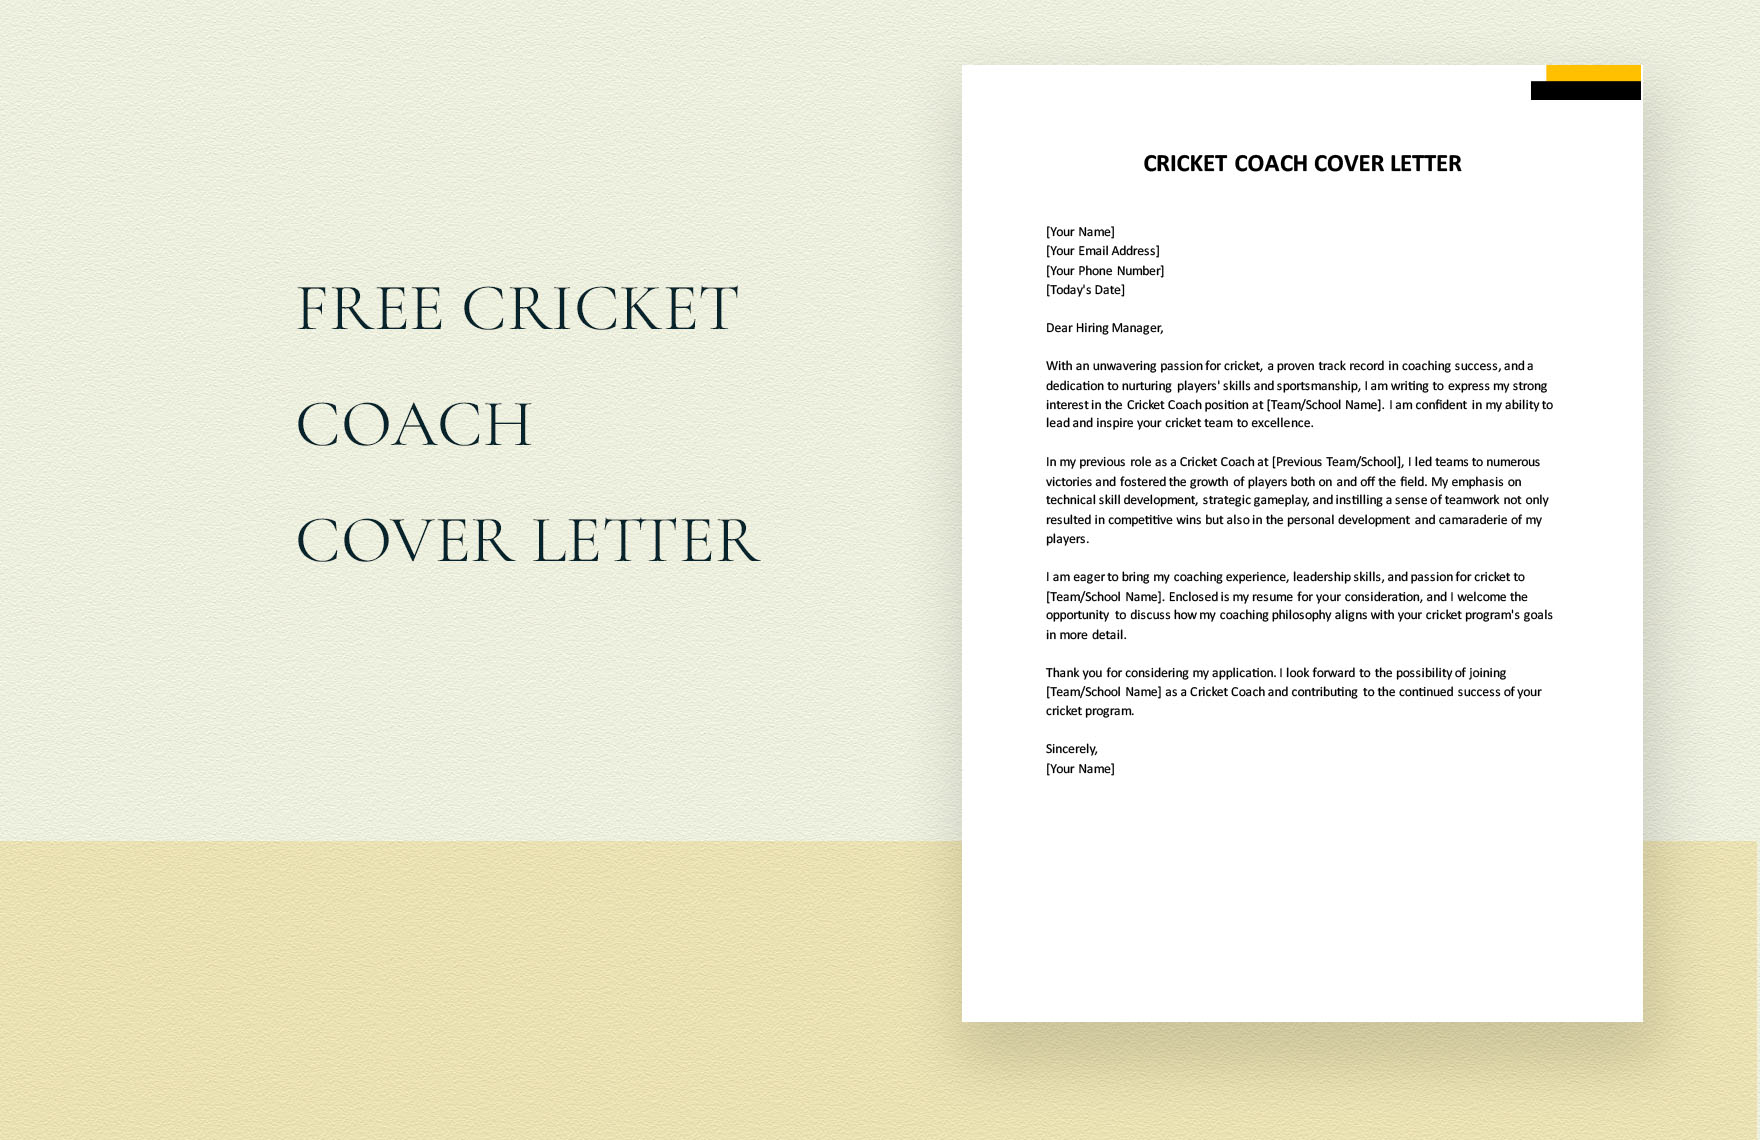 Cricket Coach Cover Letter in Word, Google Docs, PDF